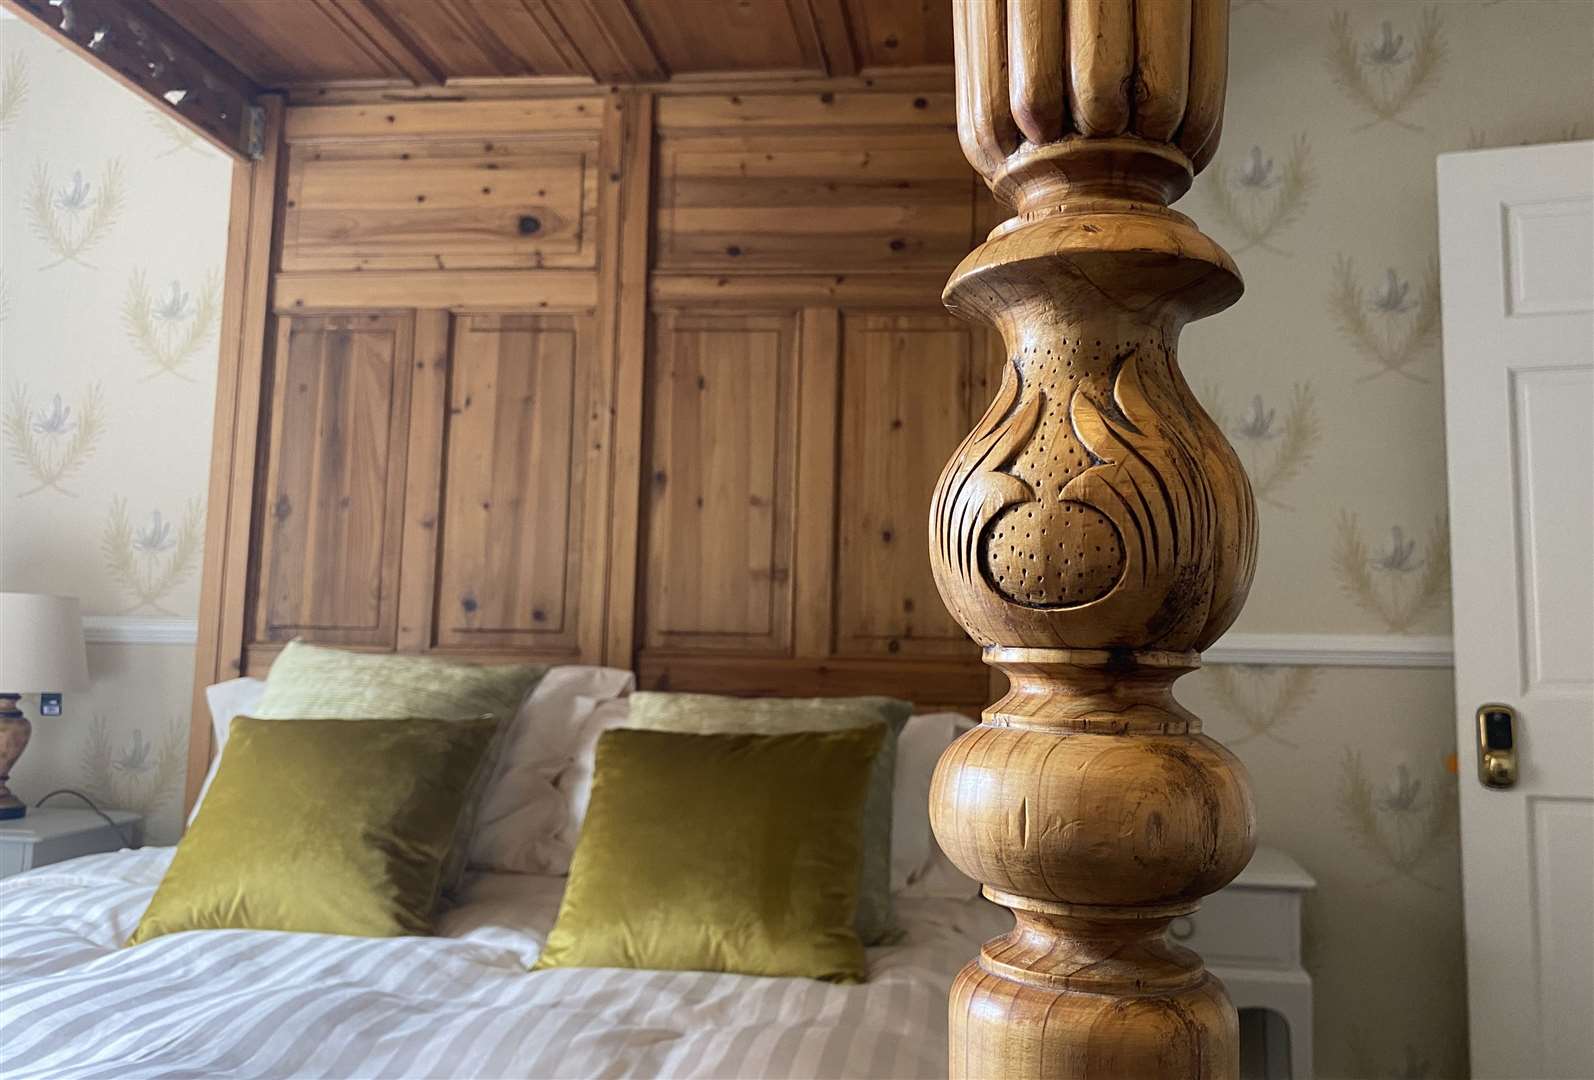 An antique pine bed in one of the rooms has been hand carved, and is around 150 years old